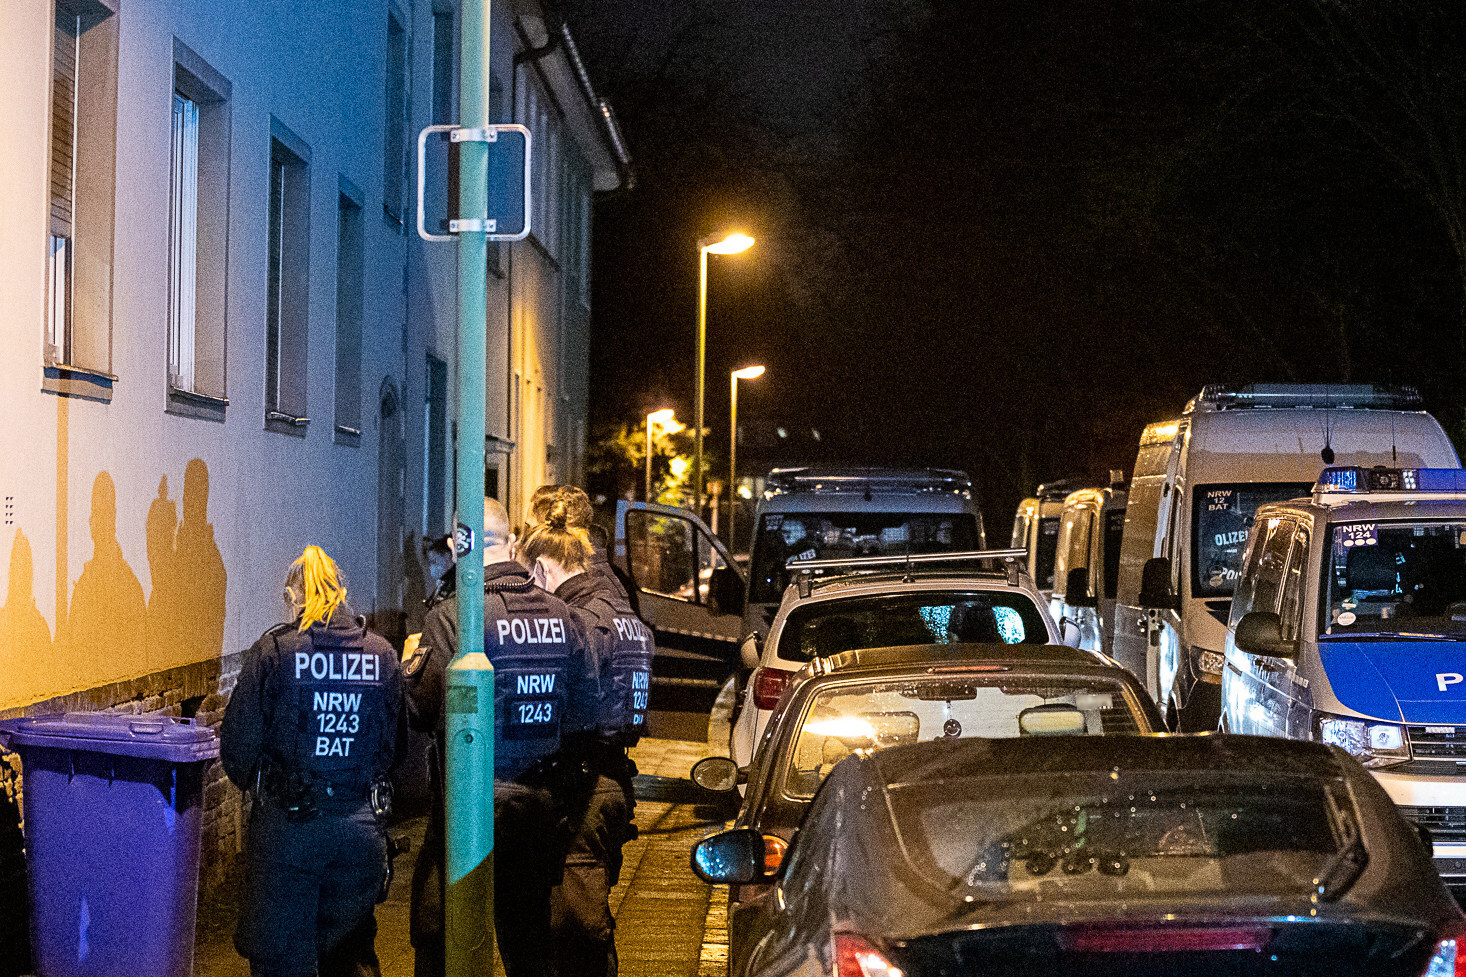 Police forces search an apartment building in Essen, Germany. Photo: DPA